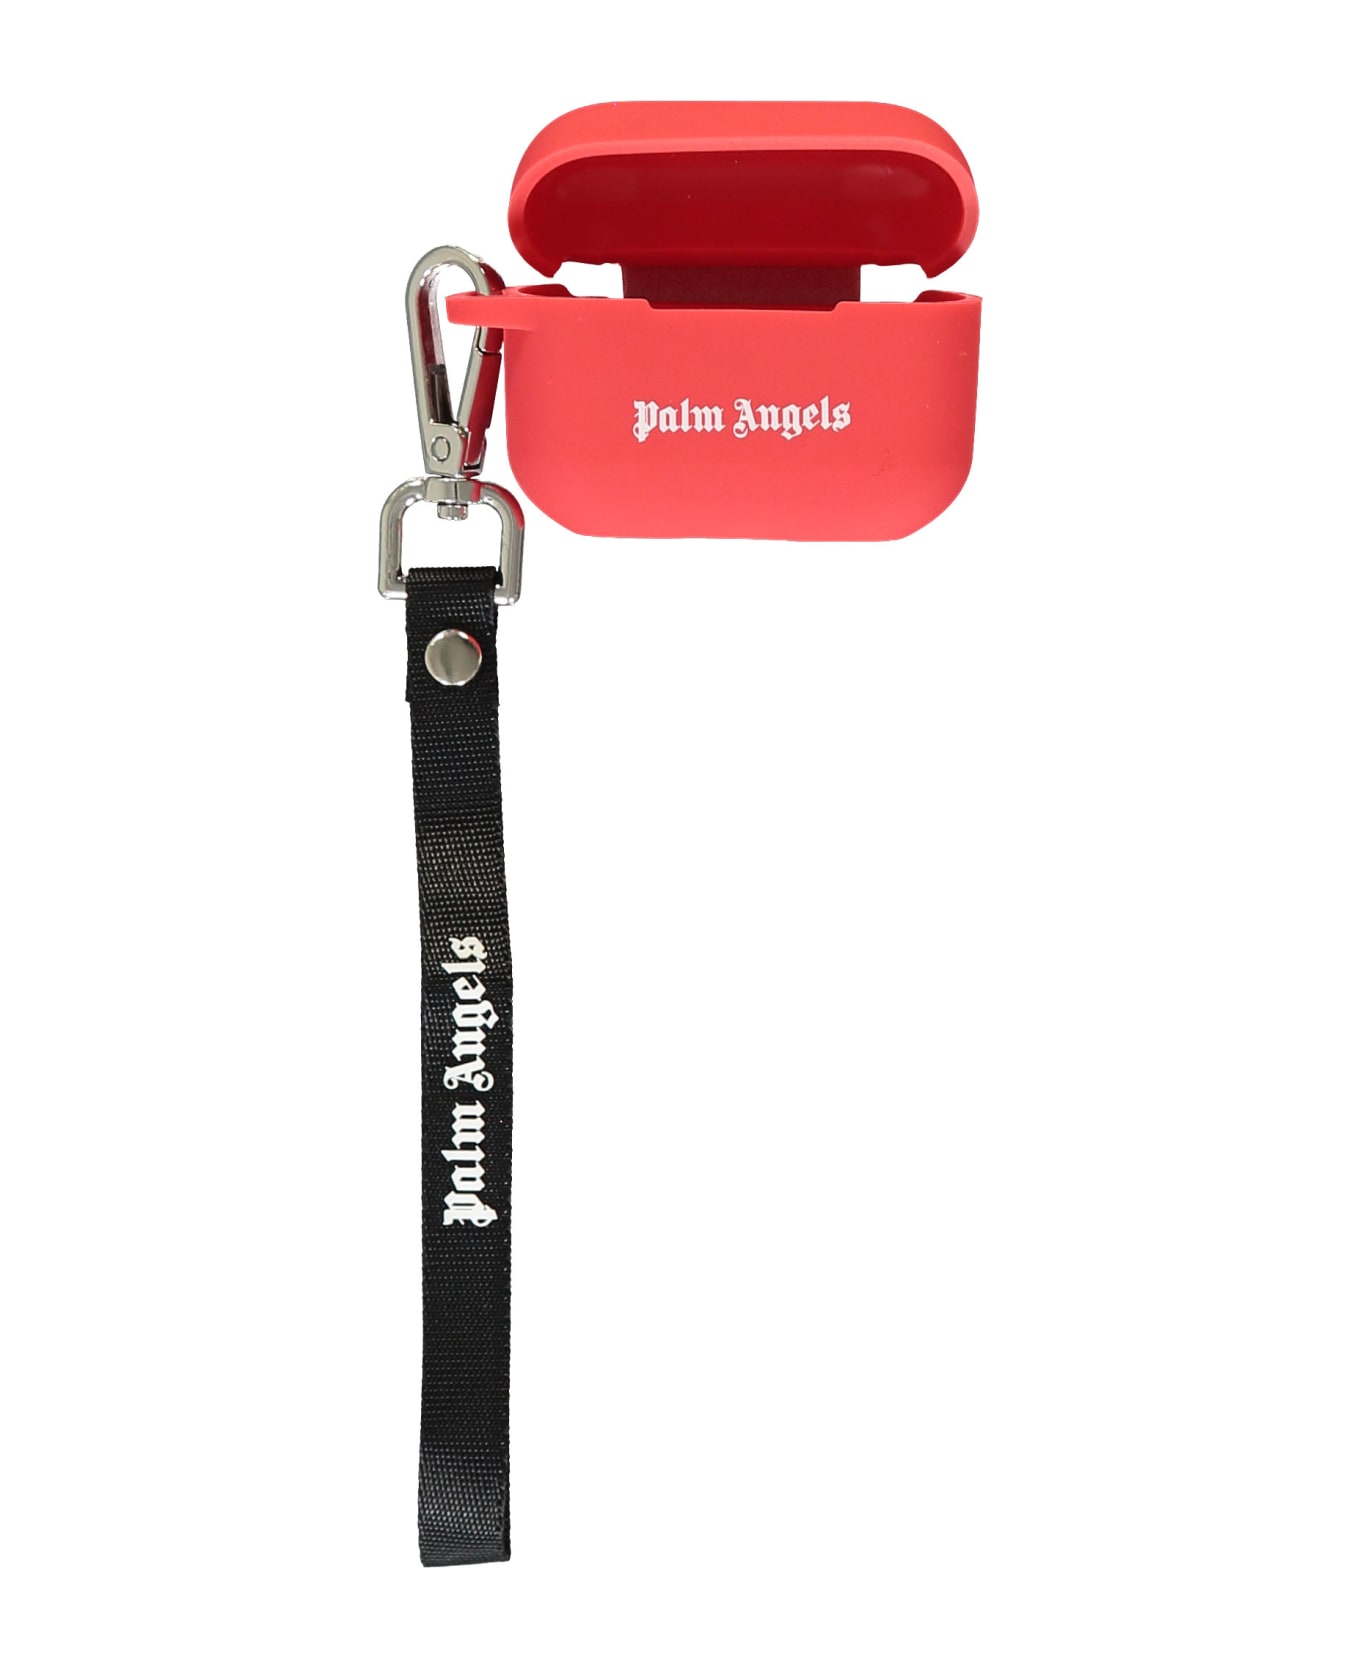 Palm Angels Airpods Pro Case - red デジタルアクセサリー